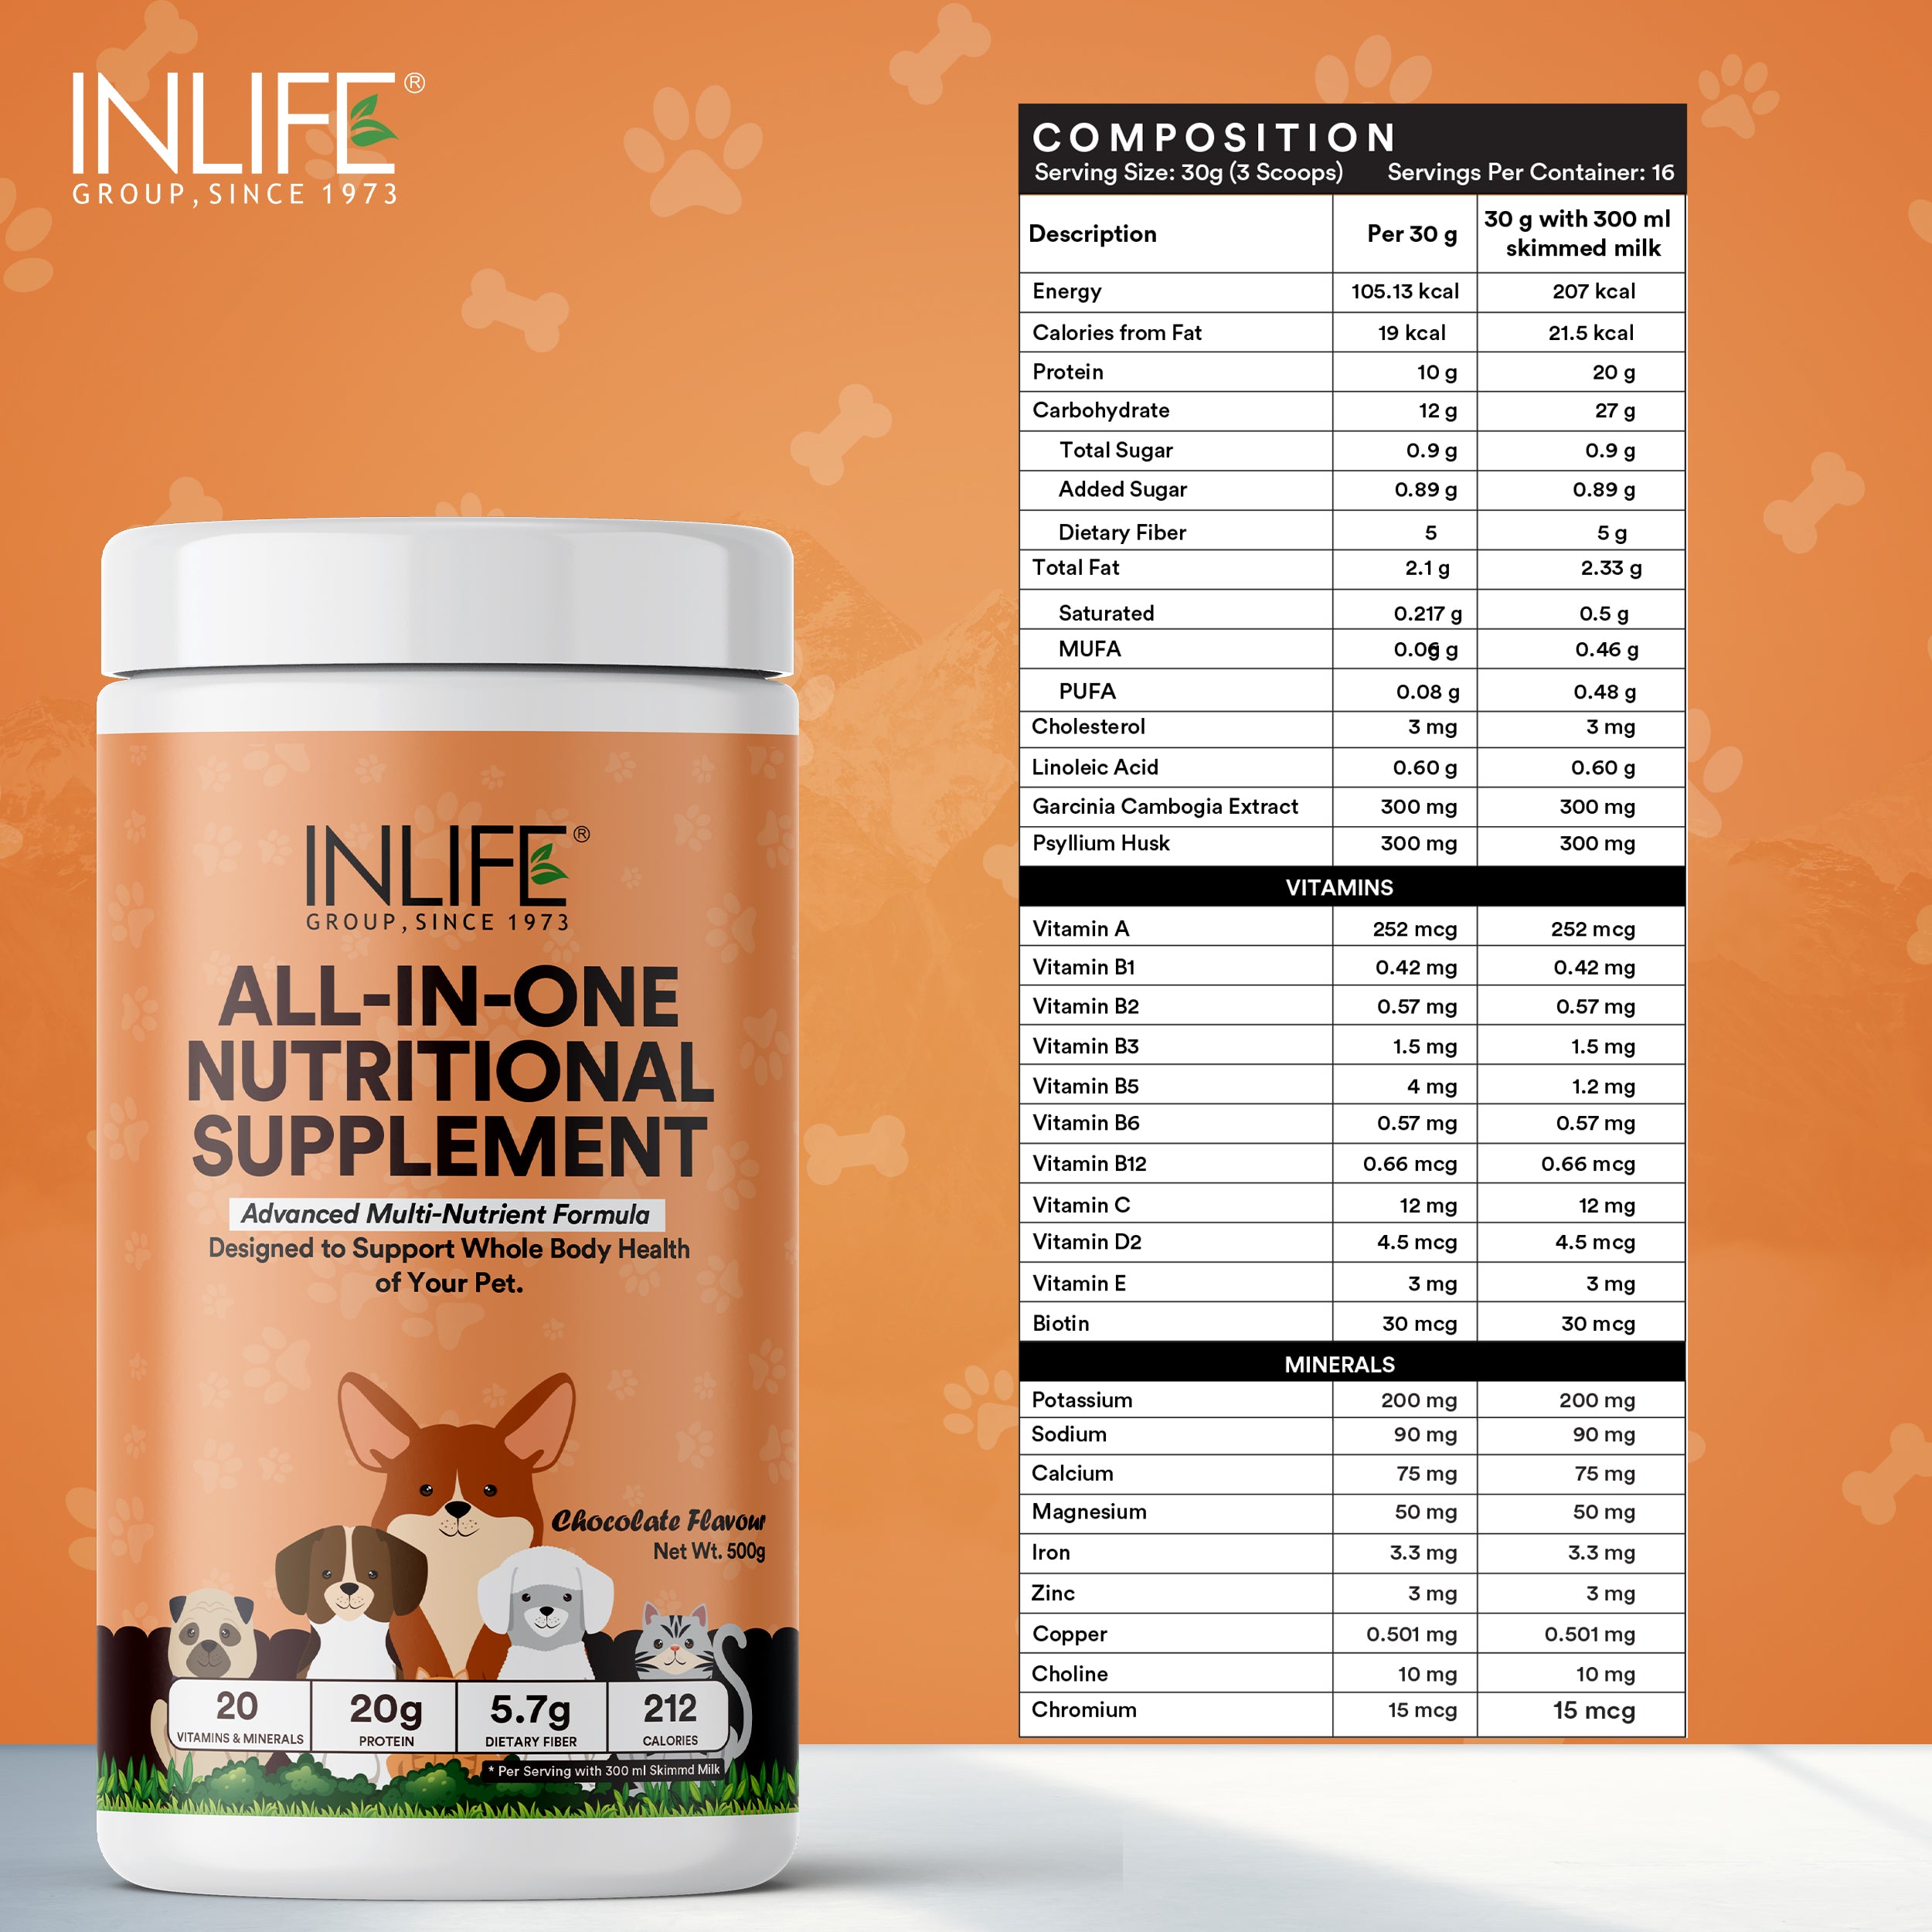 INLIFE Nutritional Meal Mix Powder for Dogs Cats Pets, Advanced Multi-Nutrient Formula